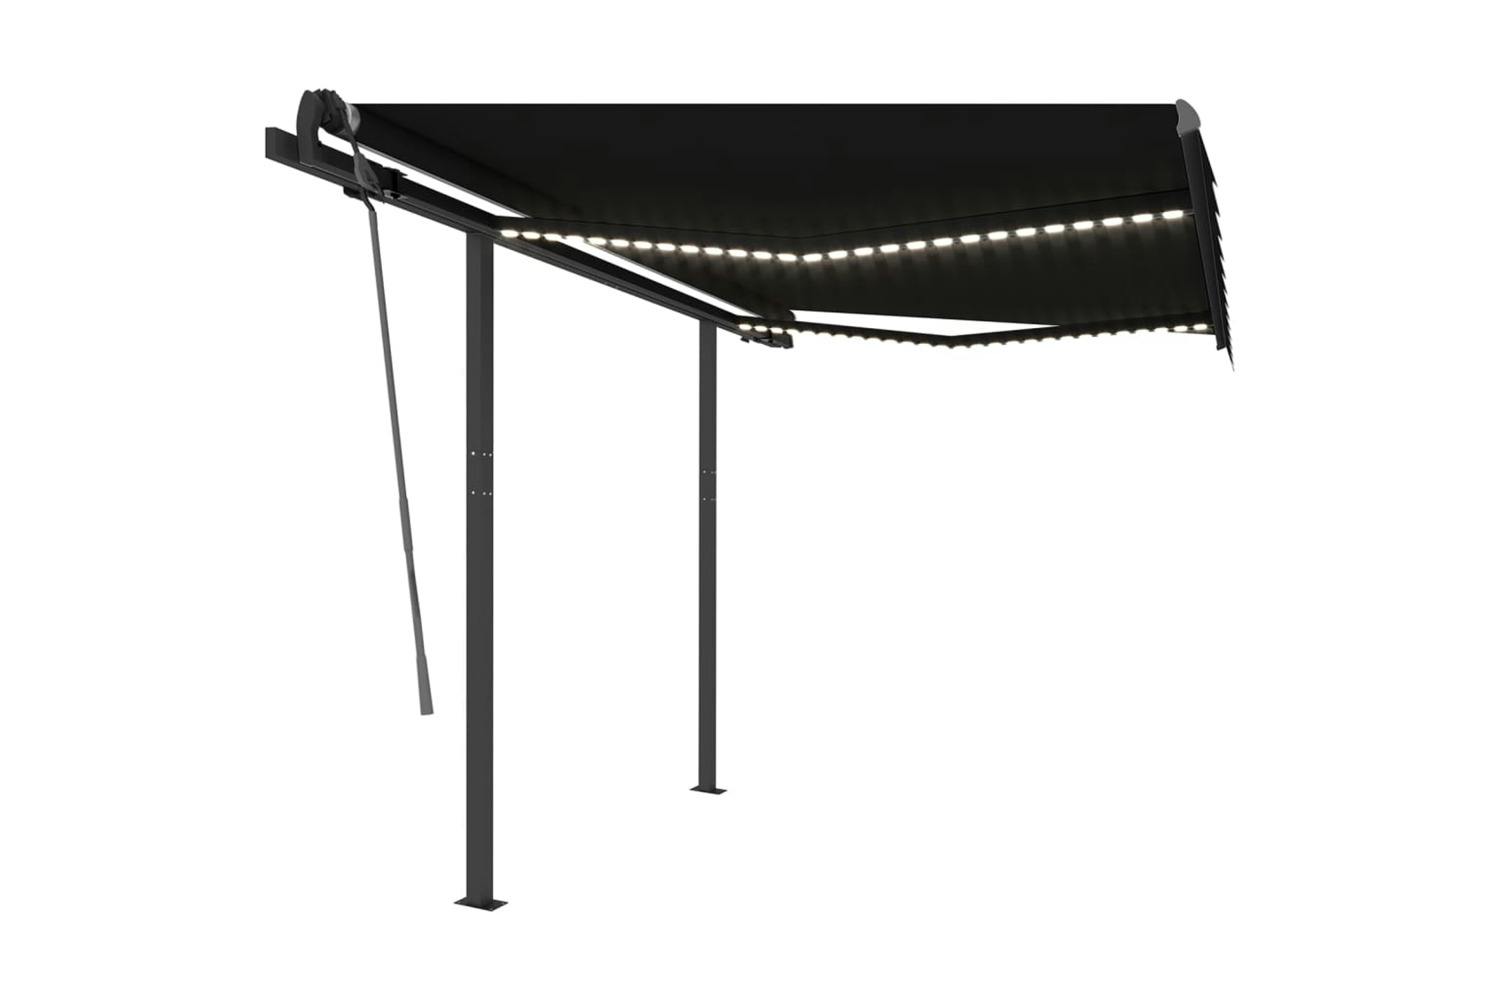 Vidaxl 3070104 Manual Retractable Awning With Led 3x2.5 M Anthracite